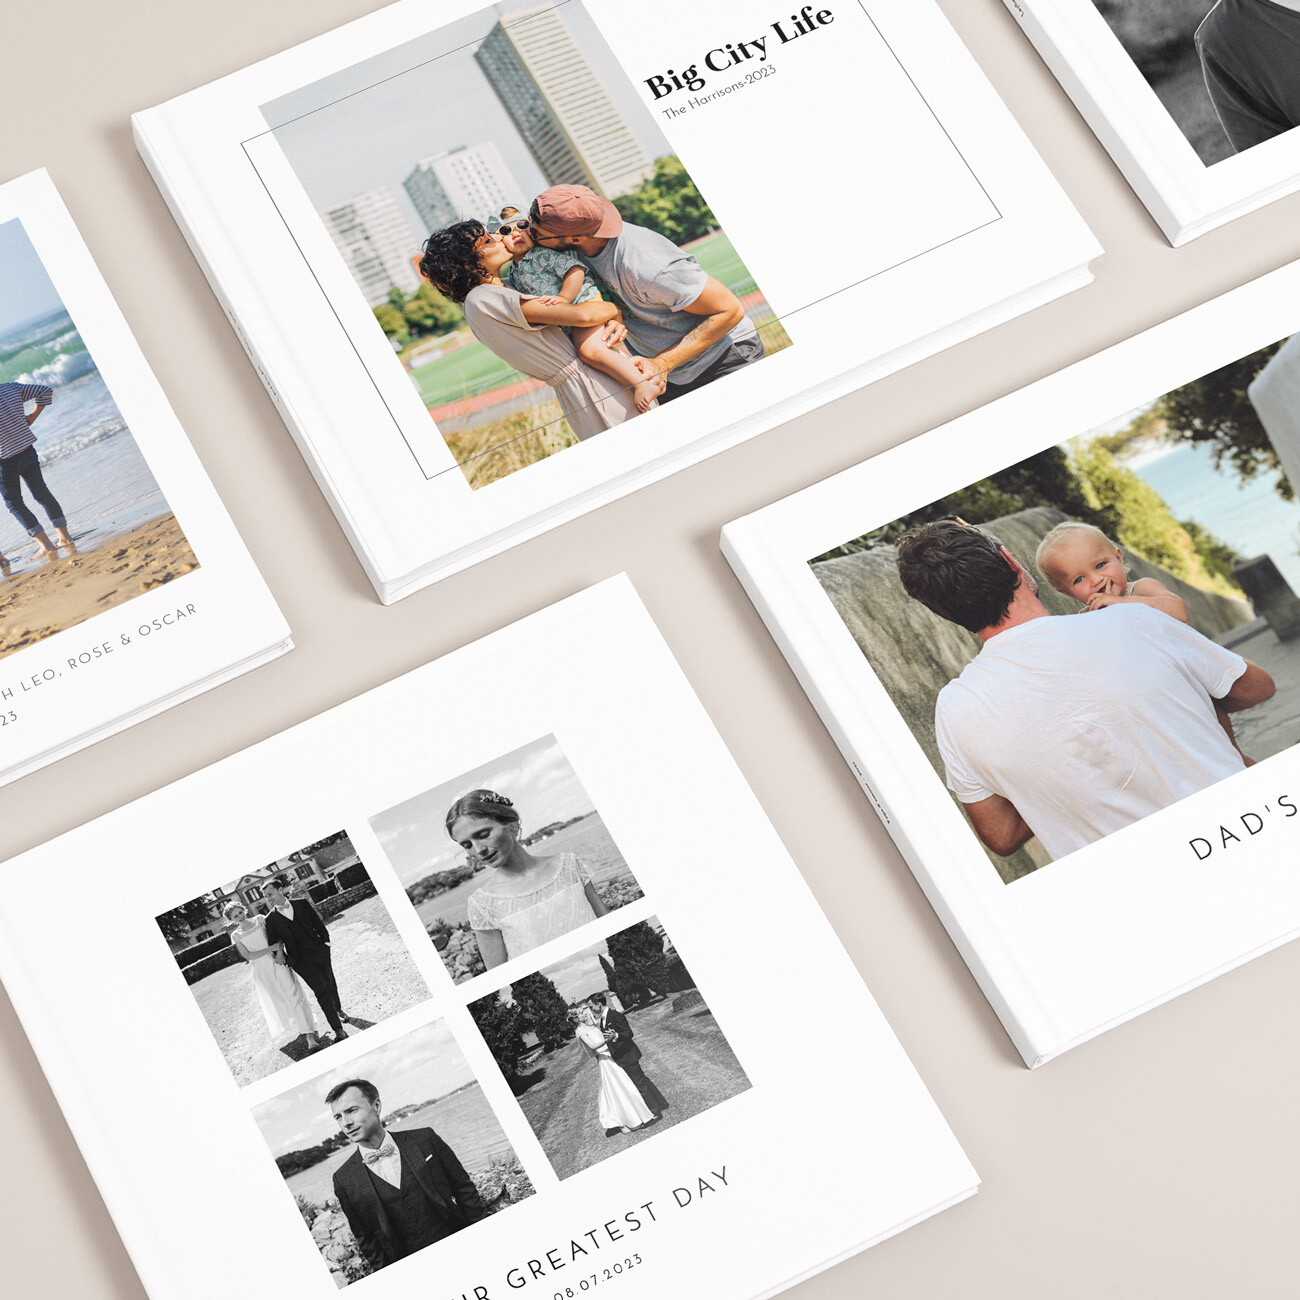 Make Photo Books Online for Any Occasion - Mimeo Photos